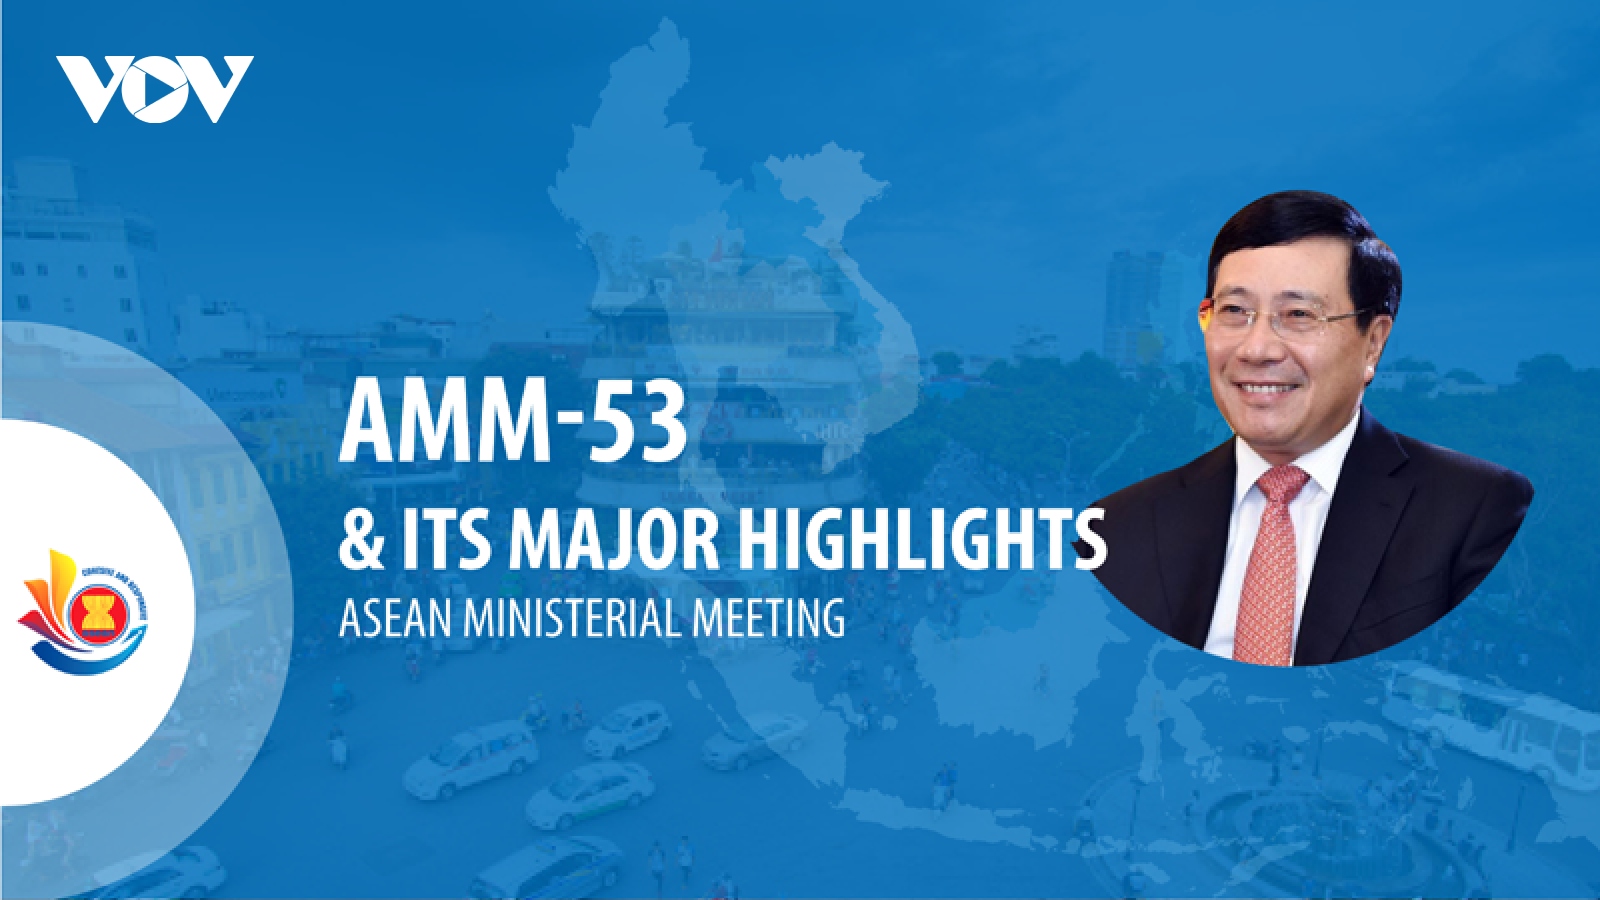 AMM-53 in Hanoi and major highlights